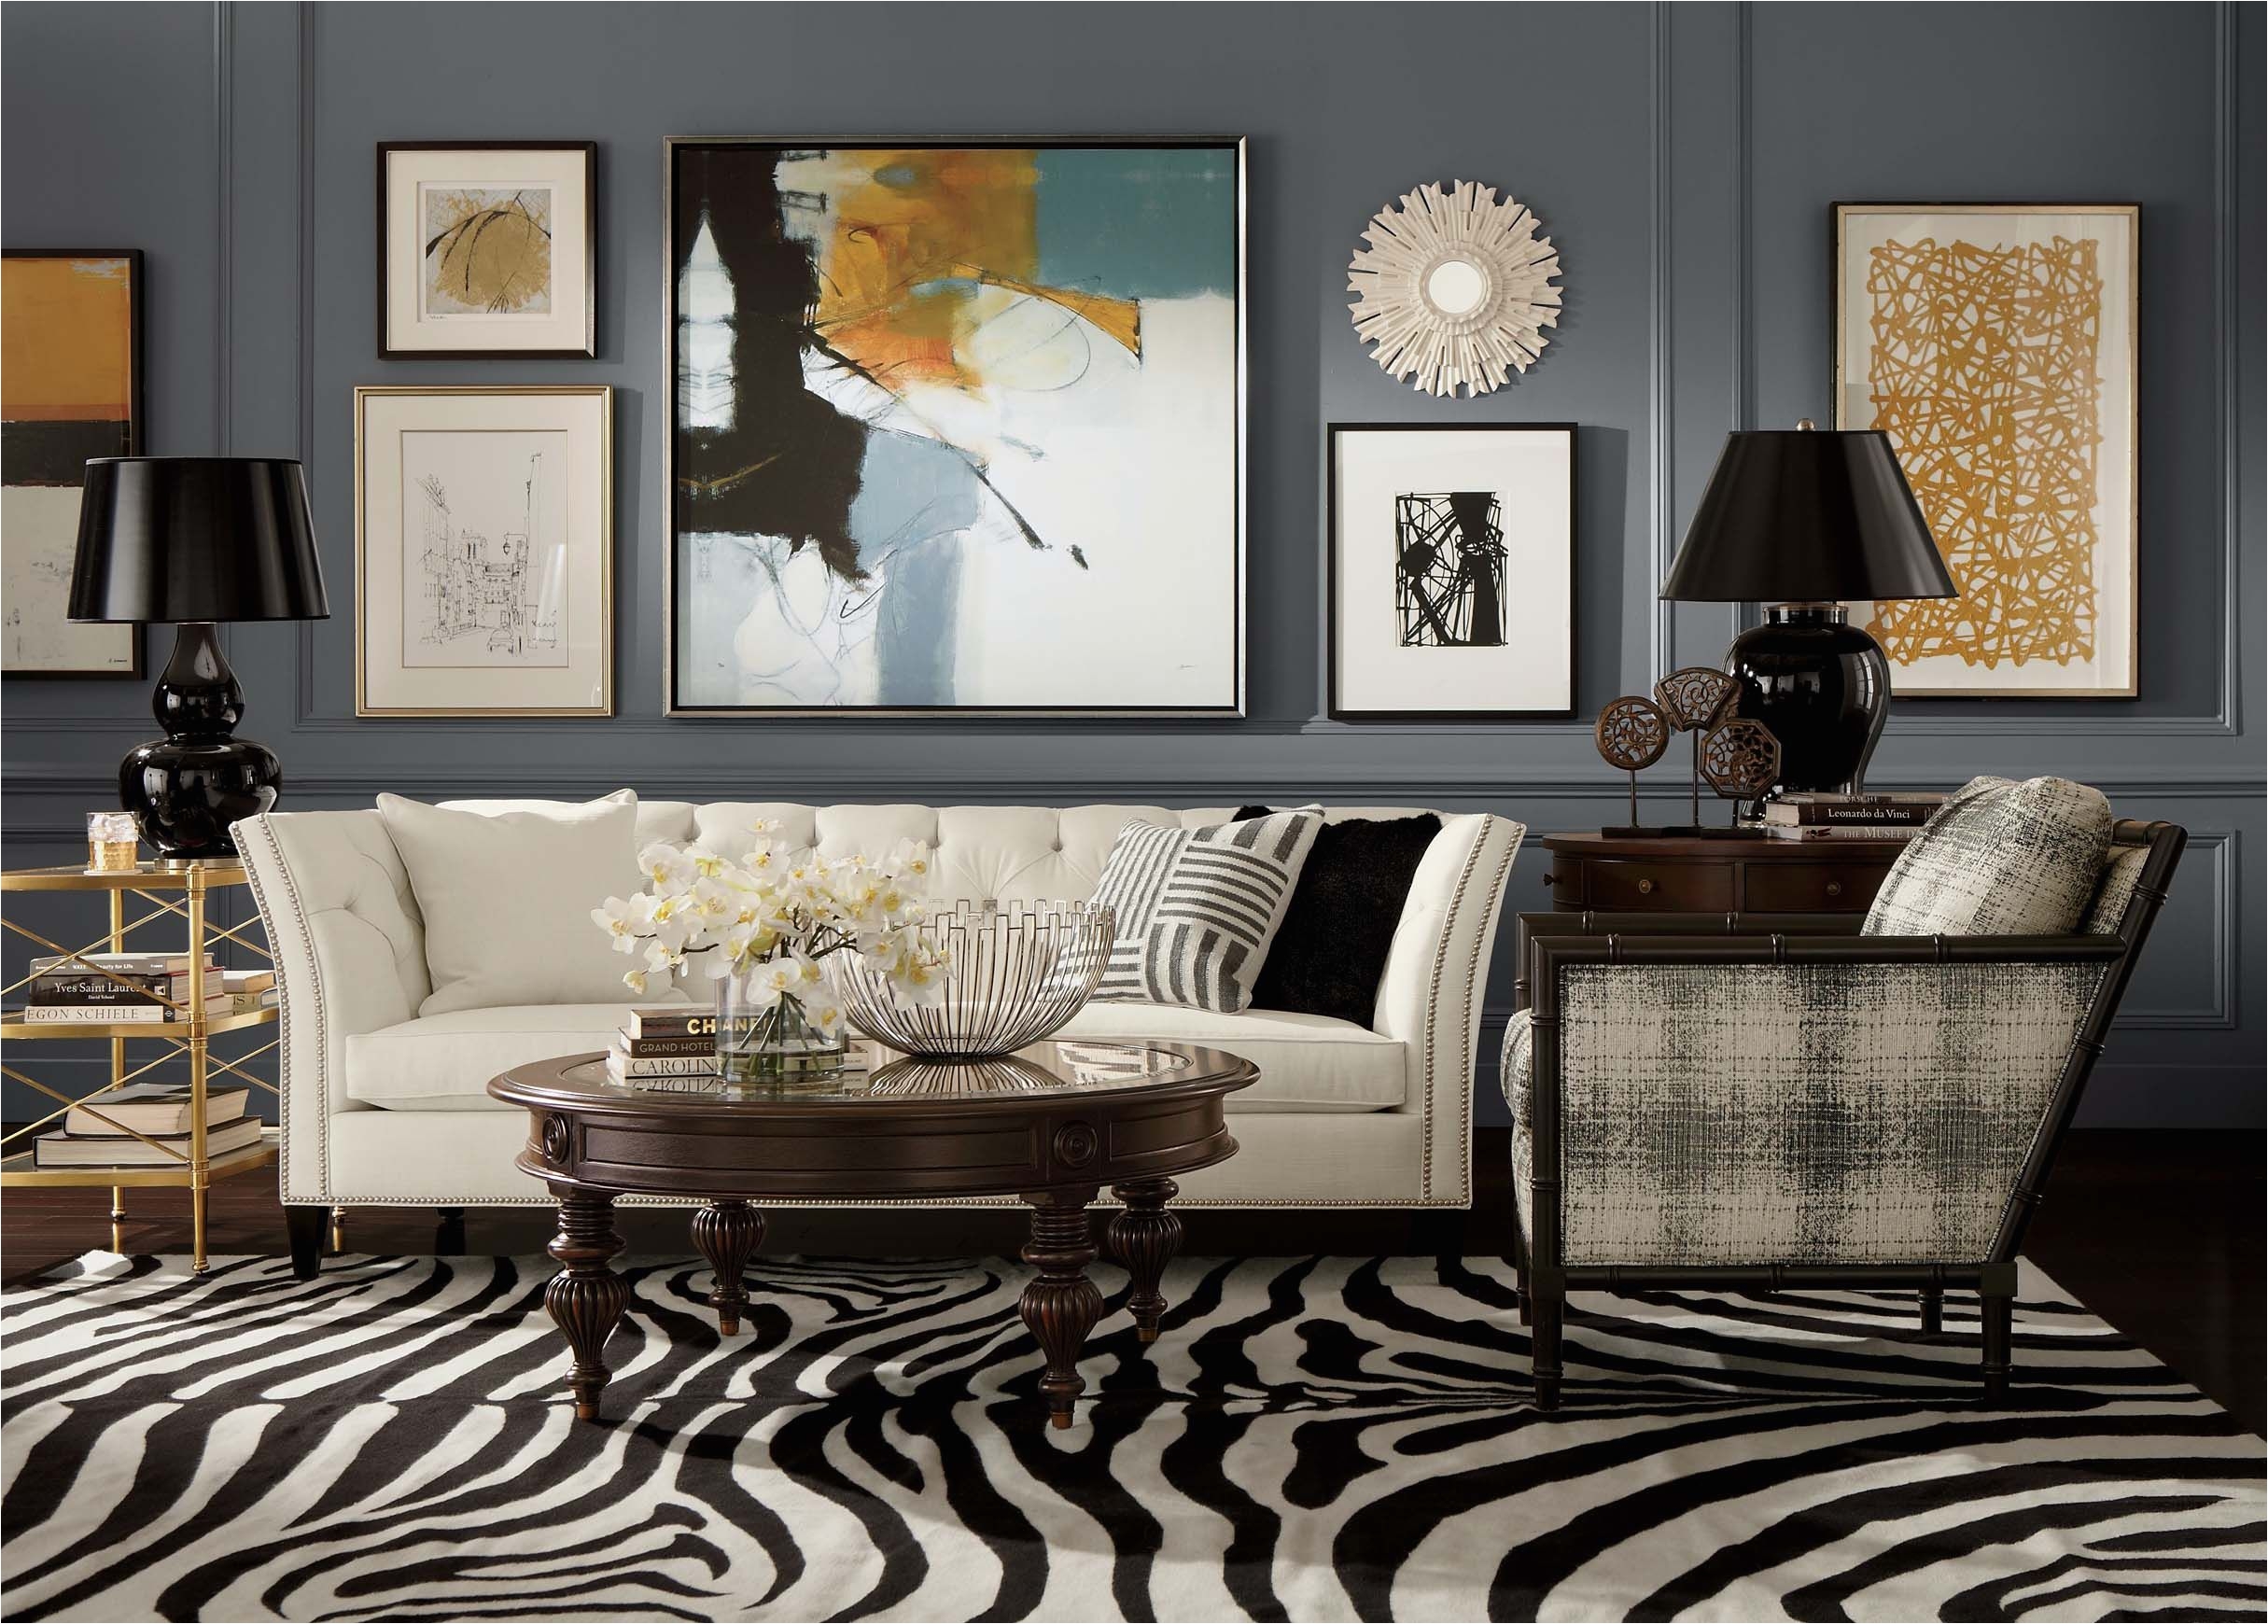 this ethan allen zebra rug in expresso ivory gives this room some spectacular style